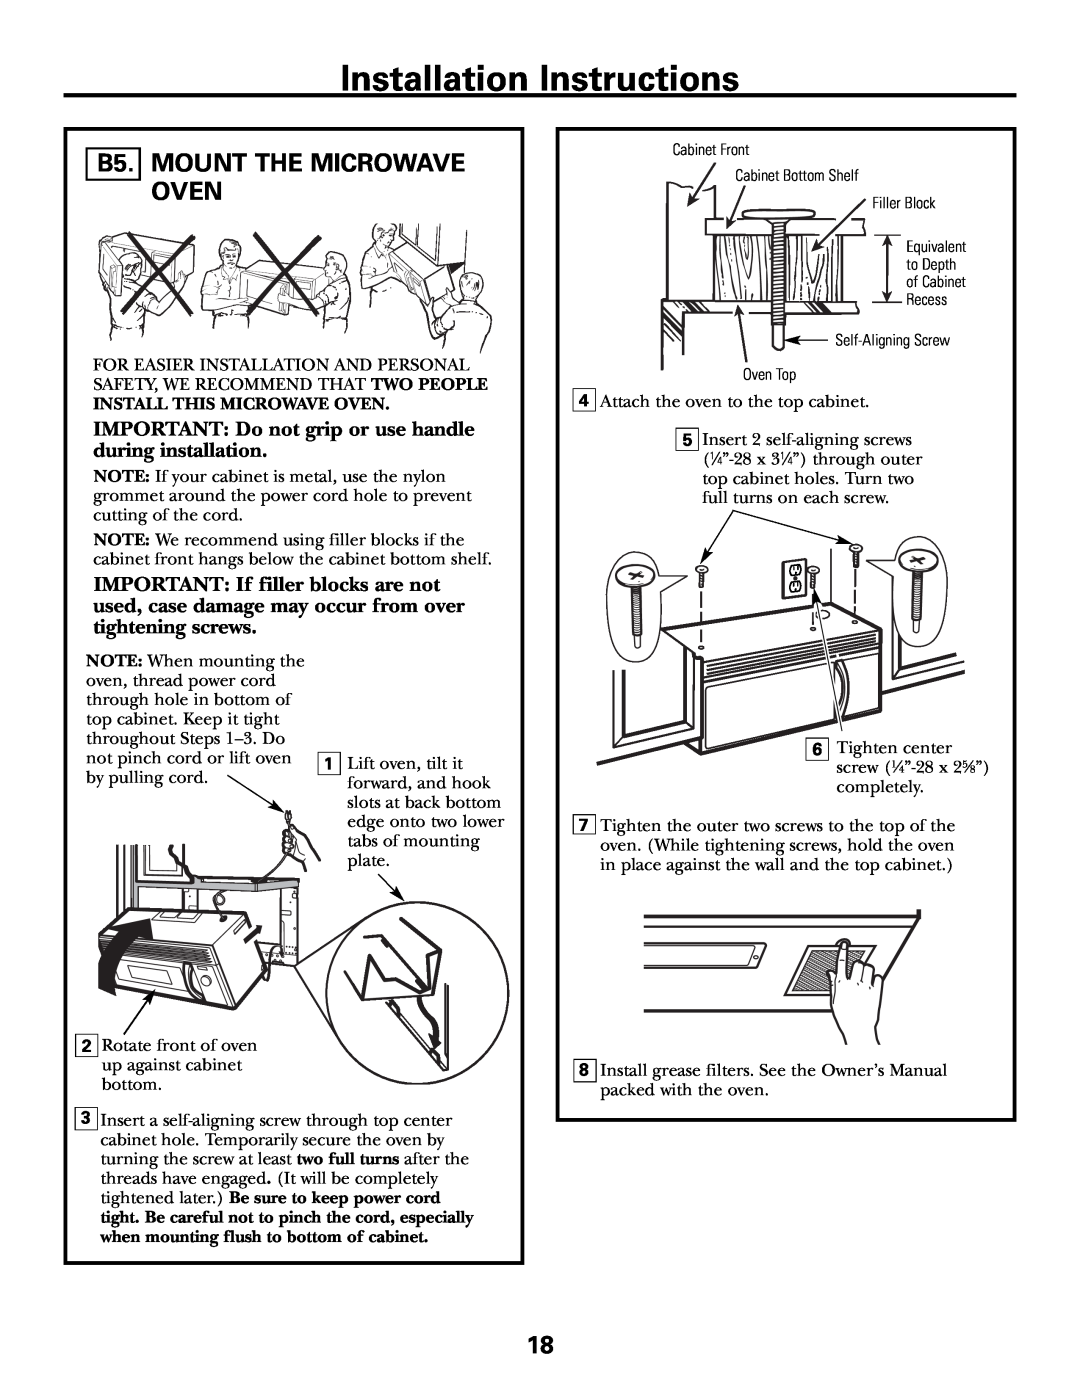 GE JVM1790 installation instructions B5. MOUNT THE MICROWAVE OVEN, Installation Instructions, Install This Microwave Oven 